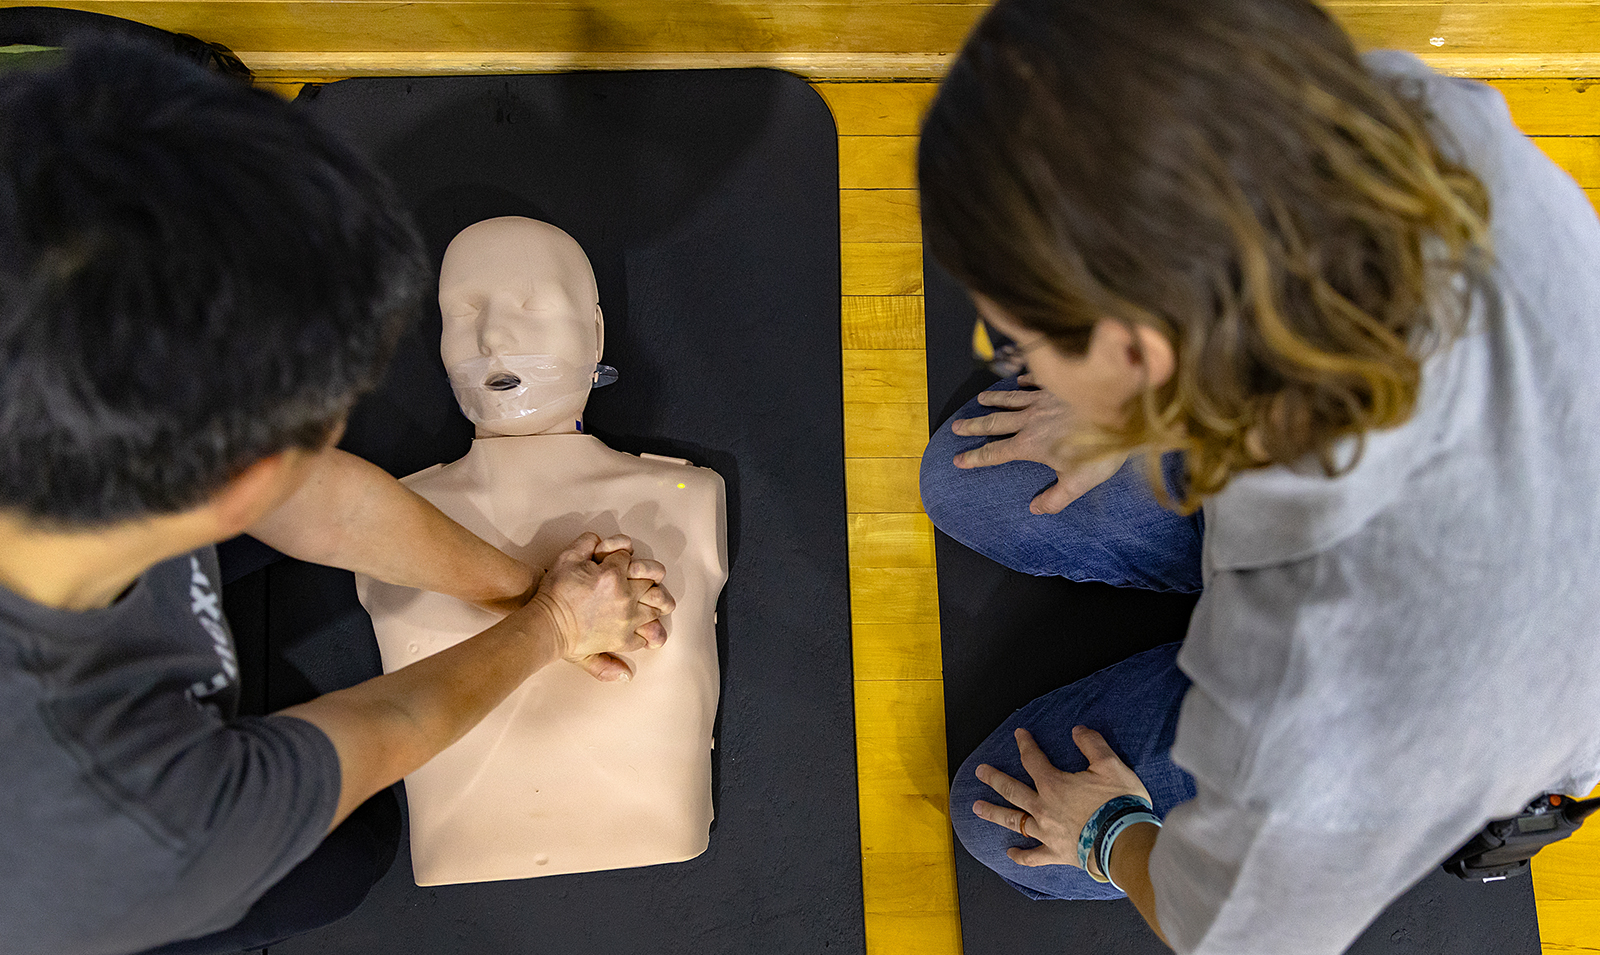 Person performing CPR on mannequin